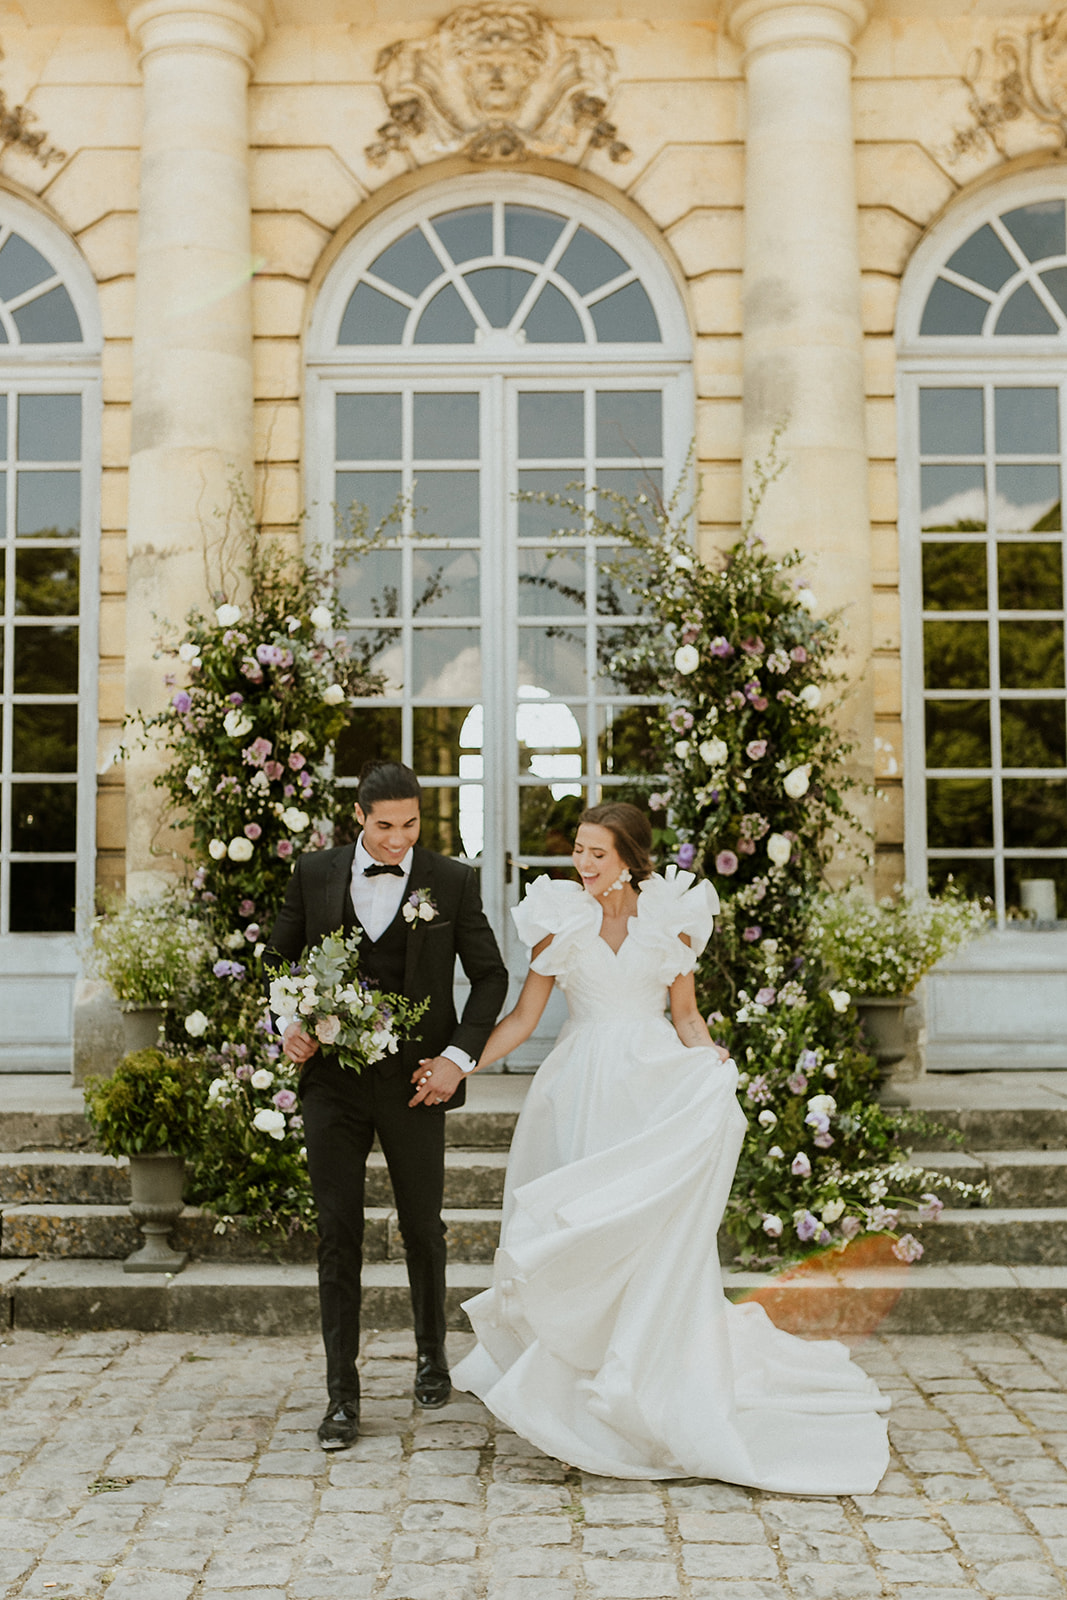 High-fashion outdoor wedding inspiration, by wedding photographers The Millers Photo Co.